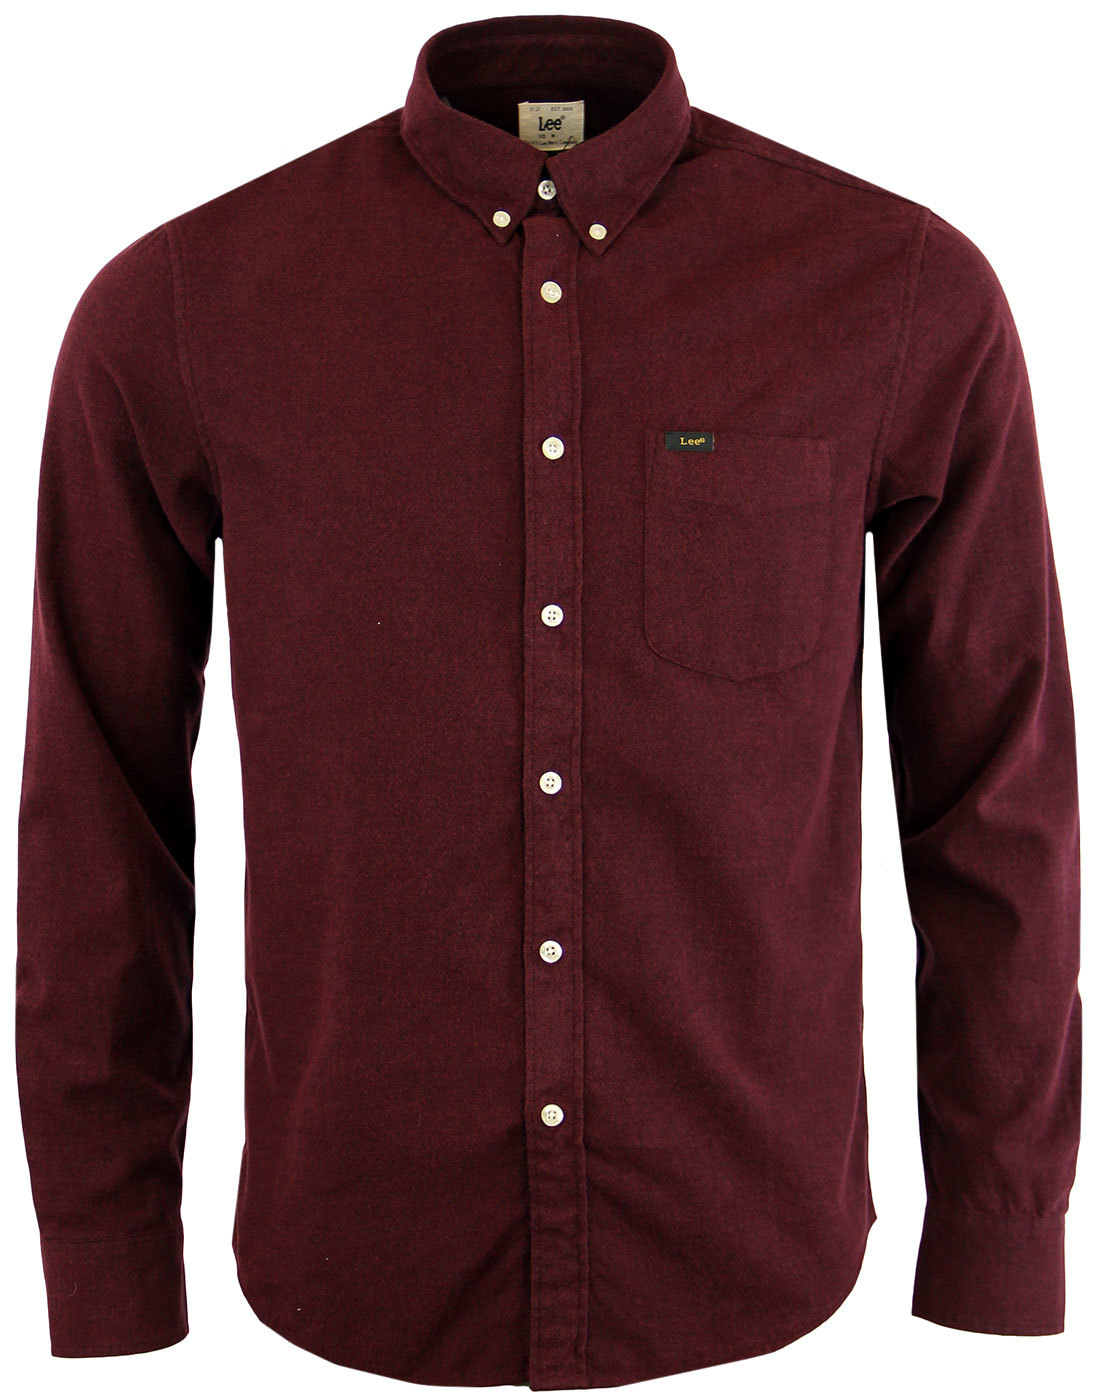 LEE Mod Button Down Brushed Cotton Oxford Shirt